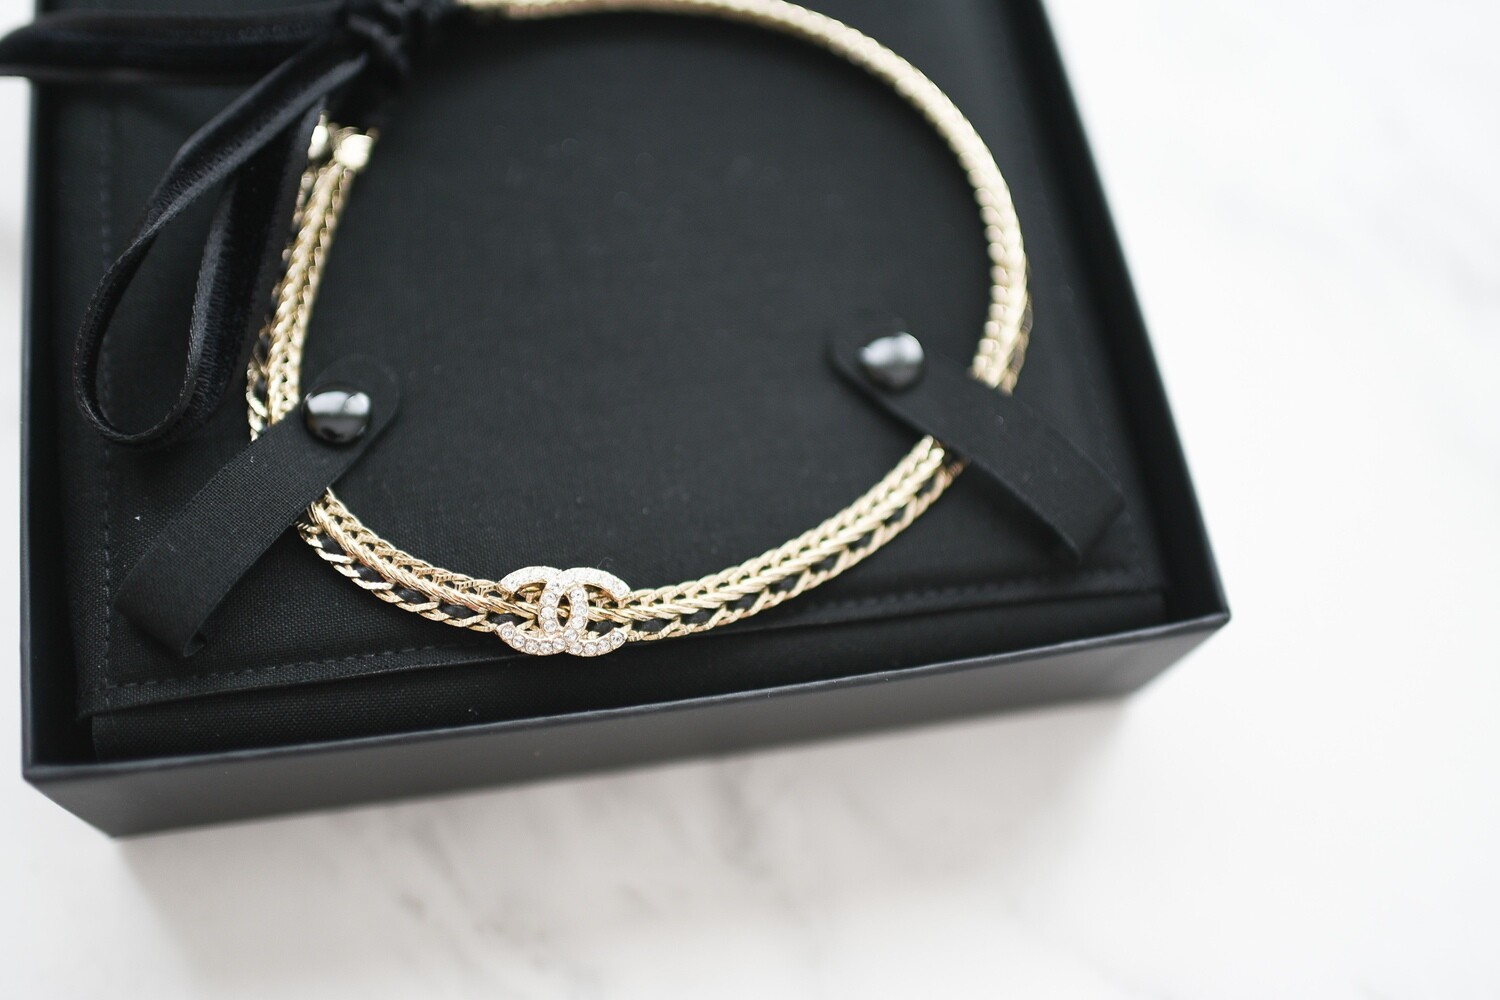 Chanel Jewelry Headband/Necklace CC Choker with Black Leather, Gold Tone,  New in Box GA001